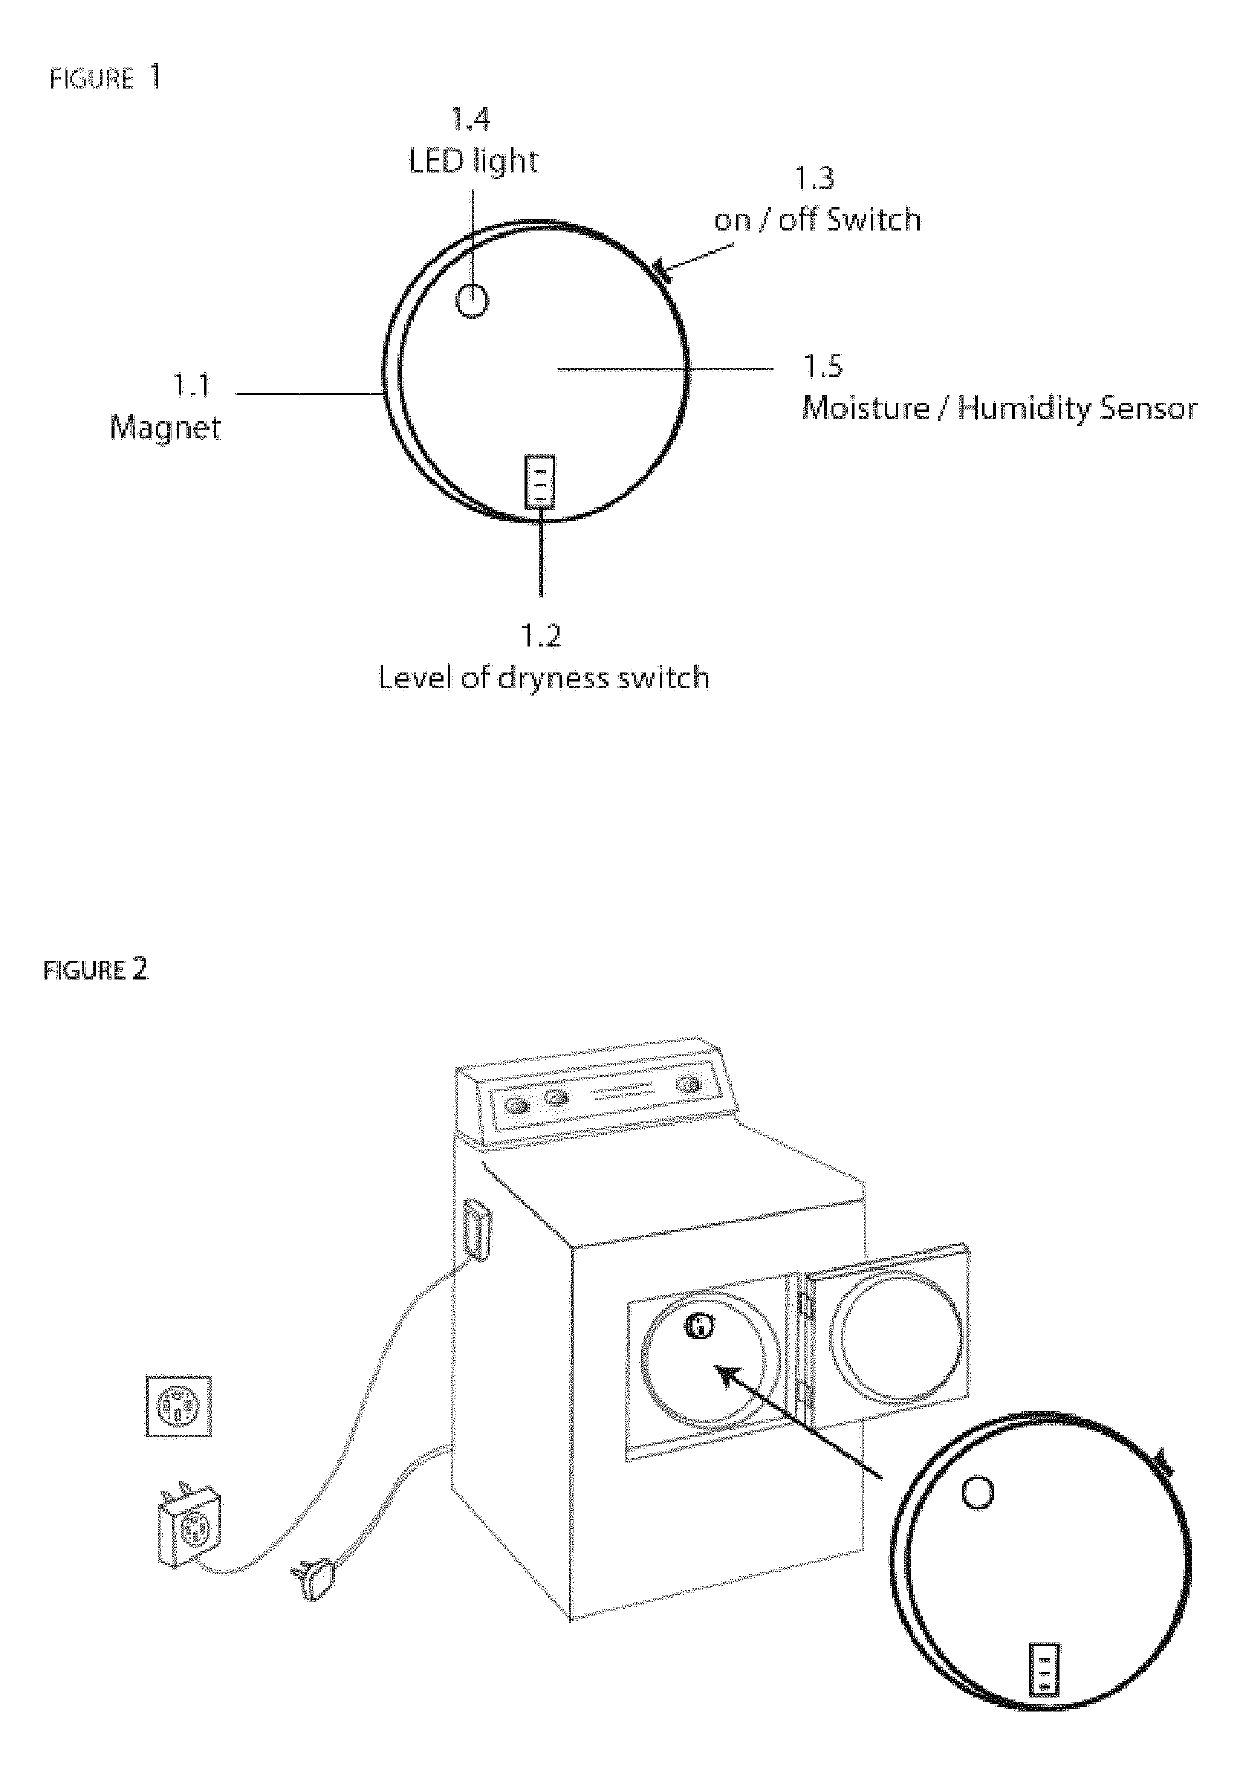 Retrofit moisture and humidity sensor and automatic shutoff device for clothes dryers